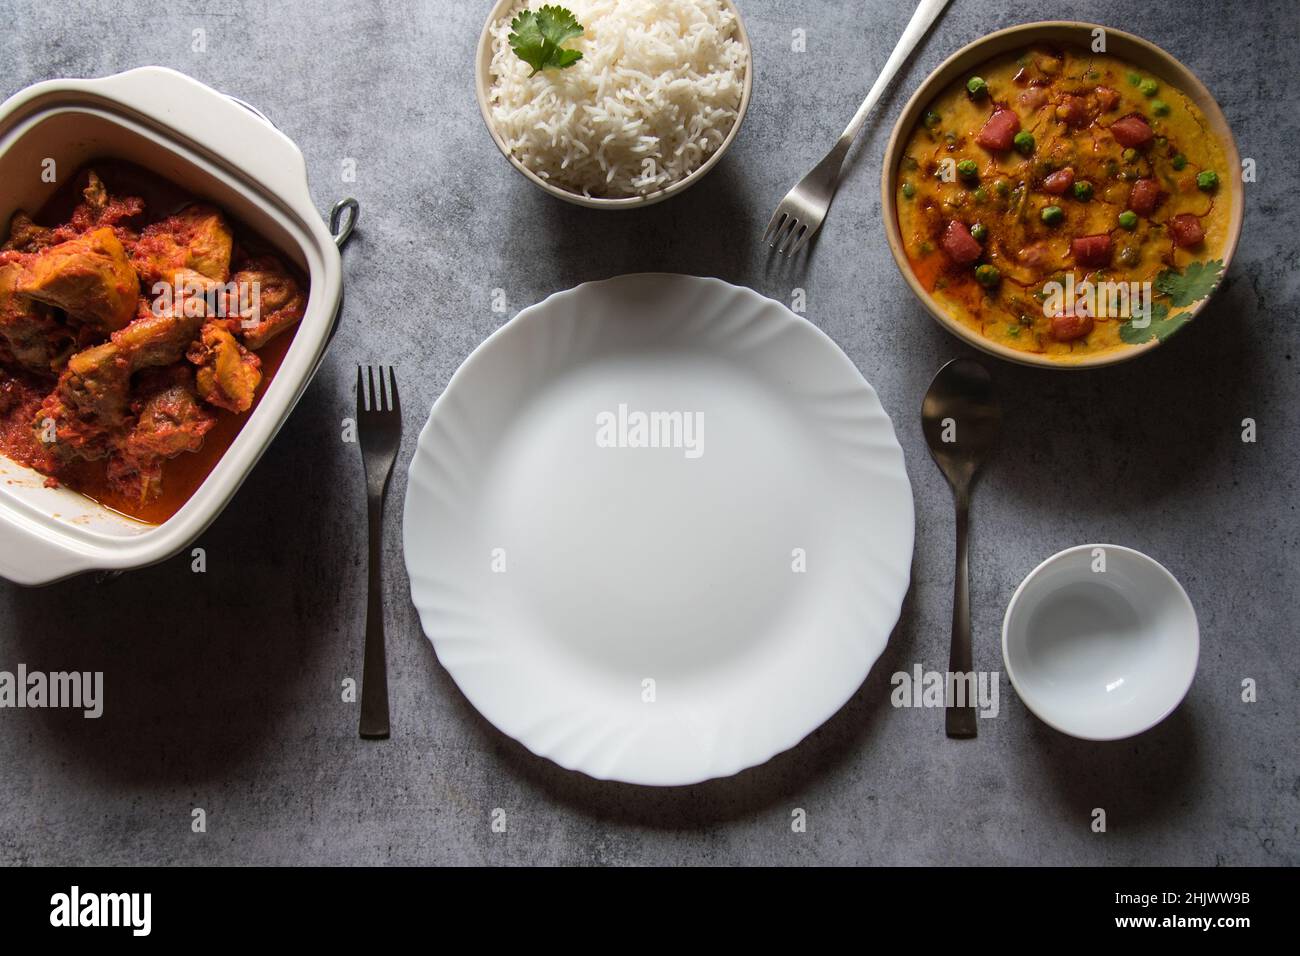 Empty plate on a background along with cooked food items to be served. Stock Photo